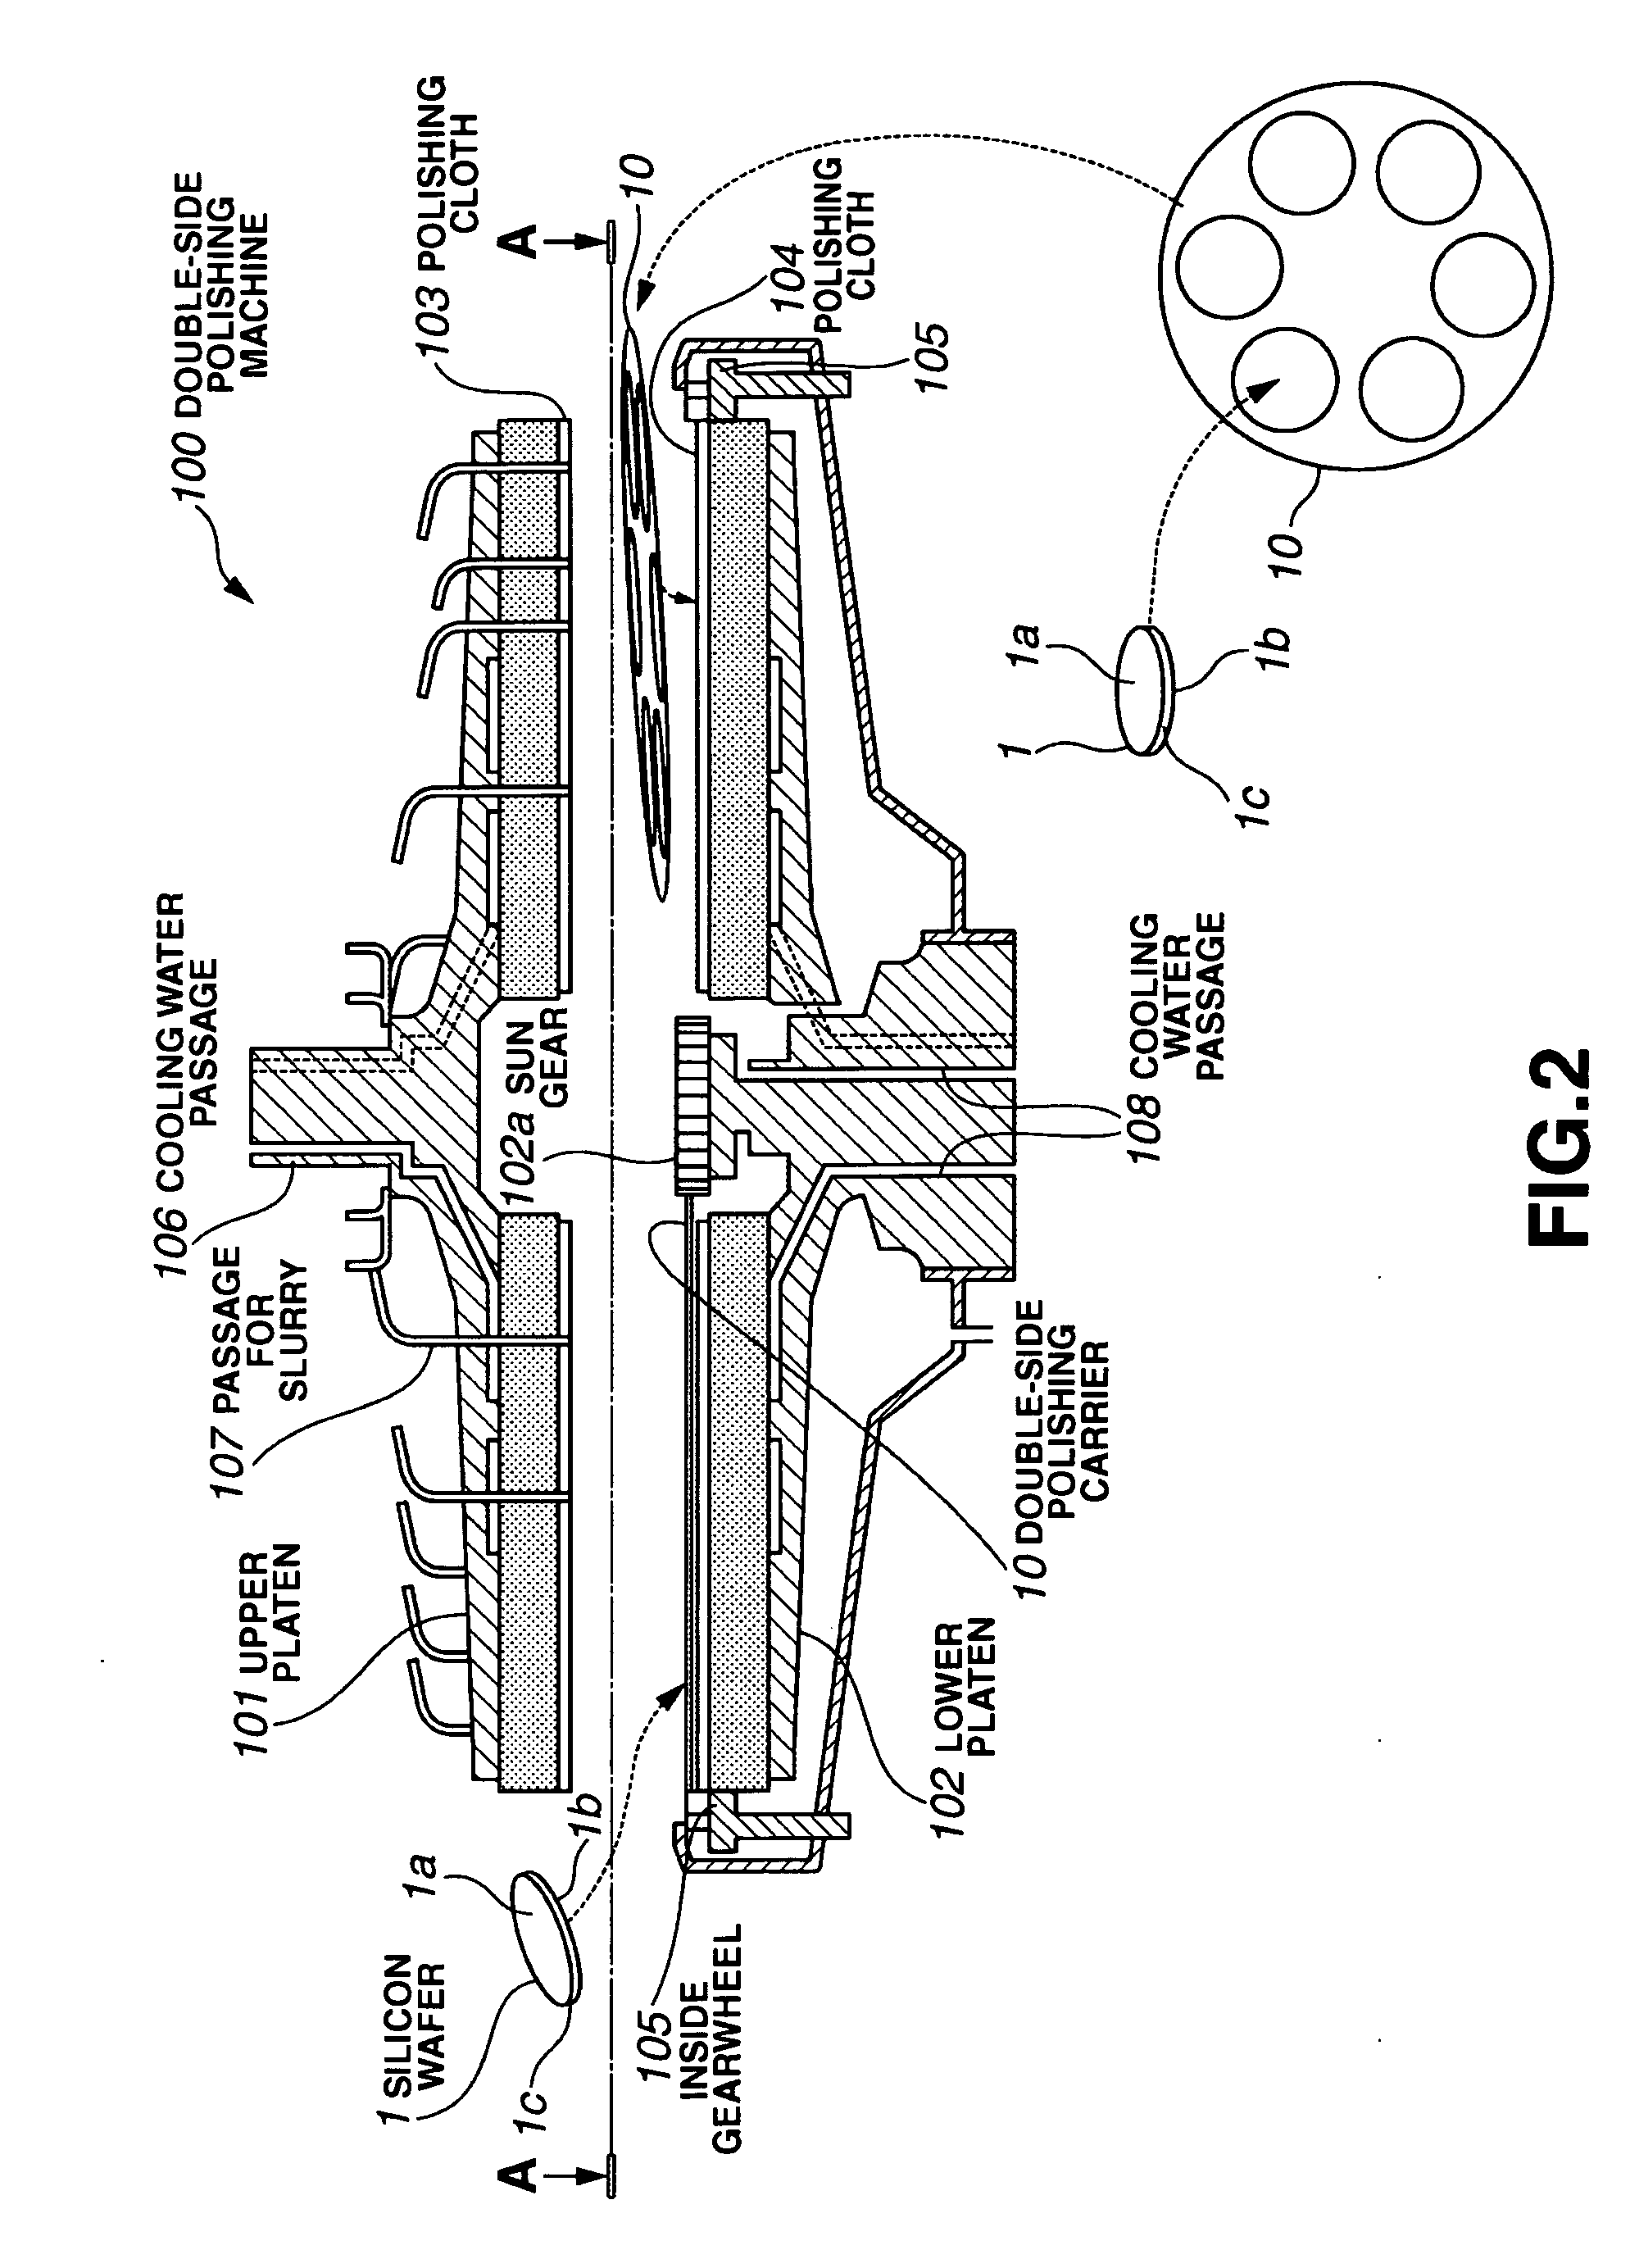 Double-side polishing carrier and fabrication method thereof